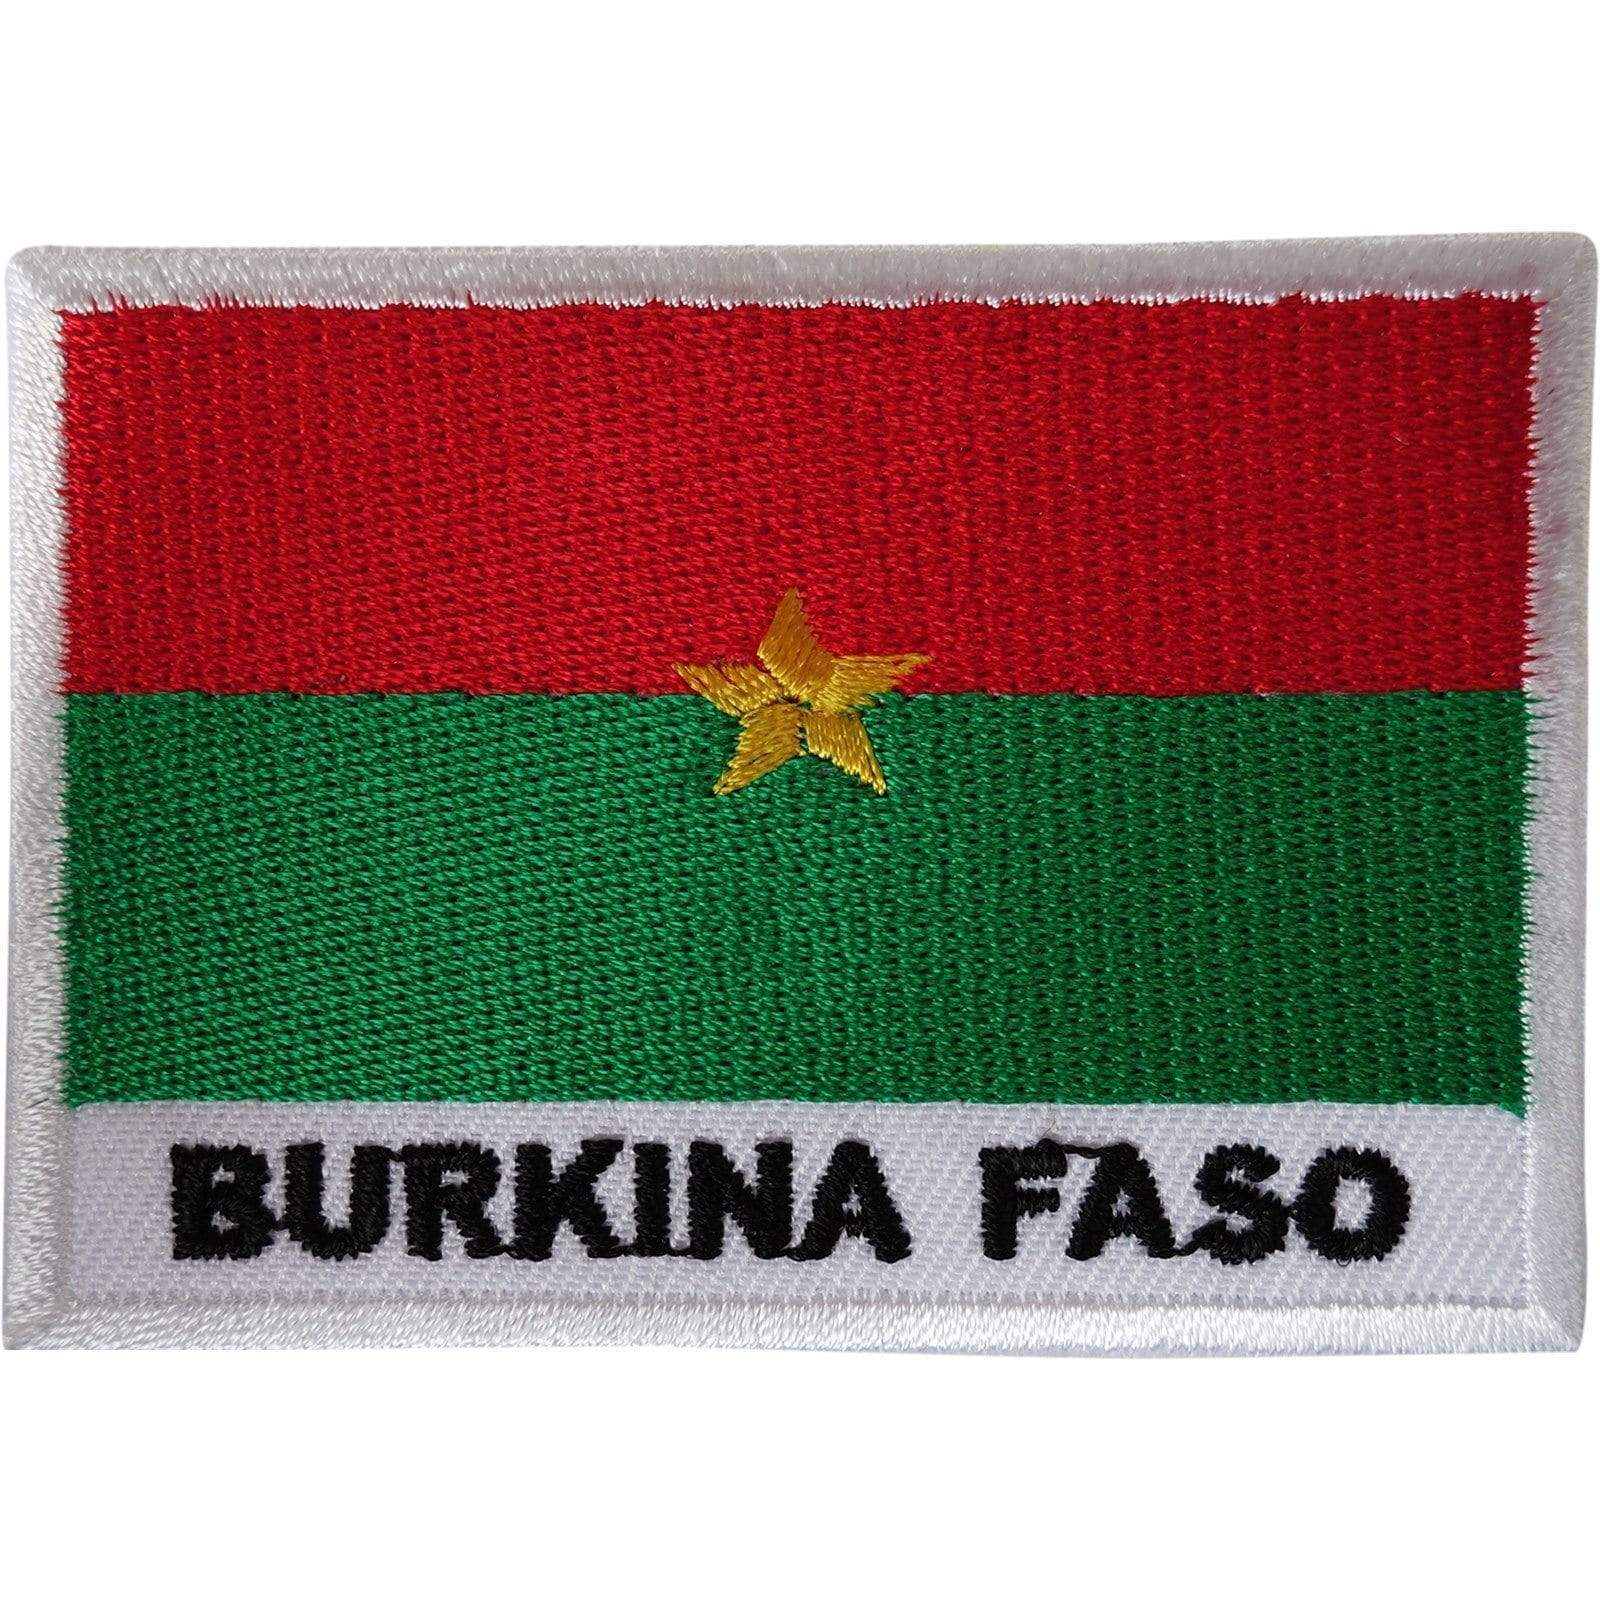 Burkina Faso Flag Patch Iron Sew On Africa Embroidered Badge Embroidery Applique